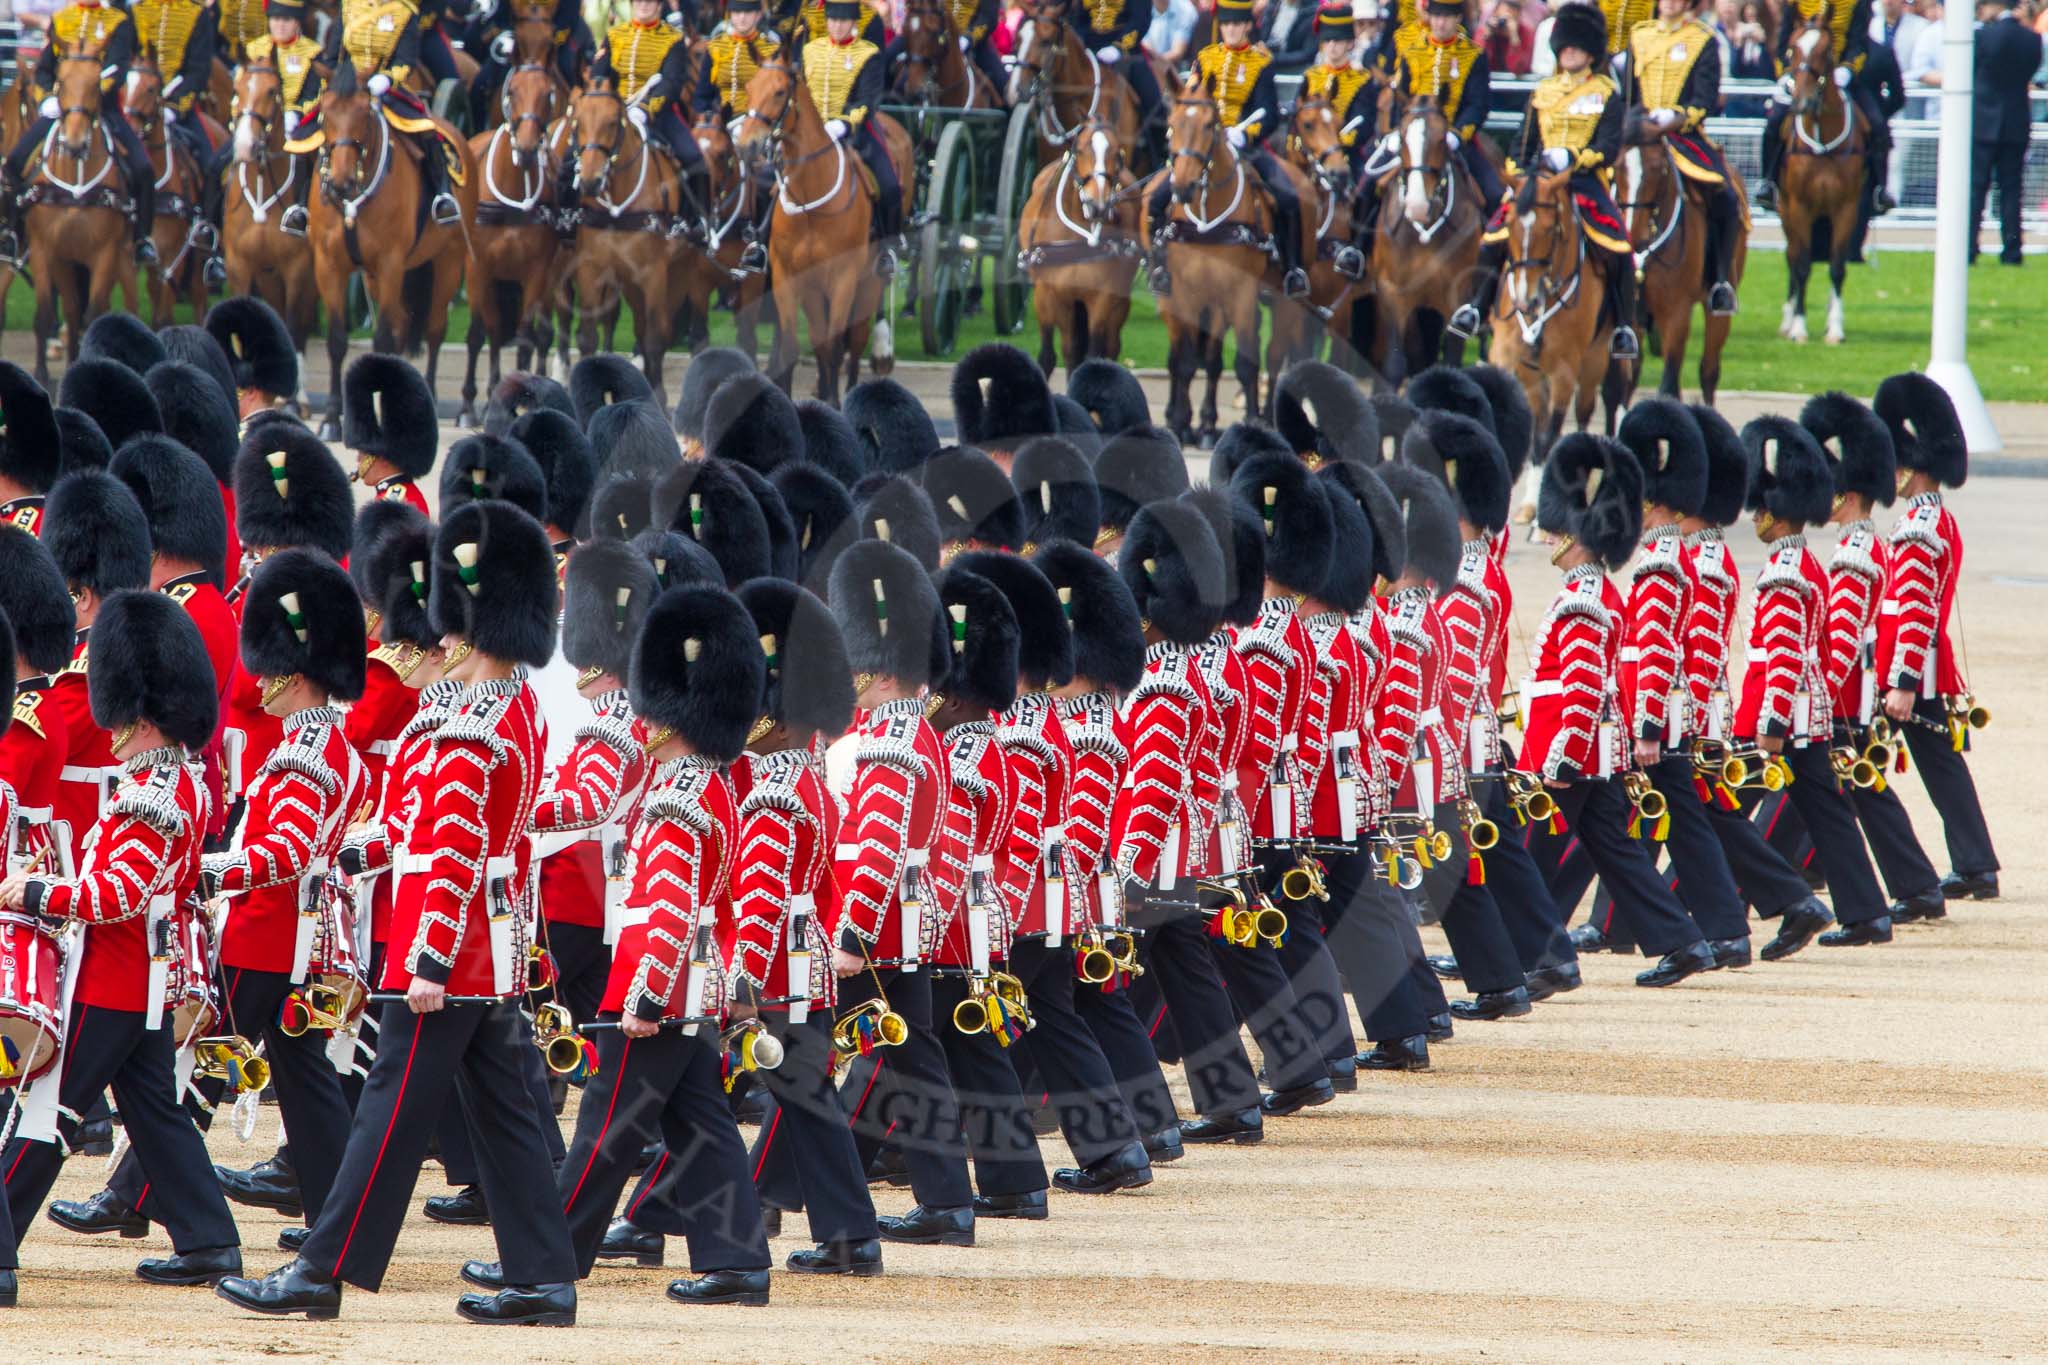 Trooping the Colour 2014.
Horse Guards Parade, Westminster,
London SW1A,

United Kingdom,
on 14 June 2014 at 11:26, image #565